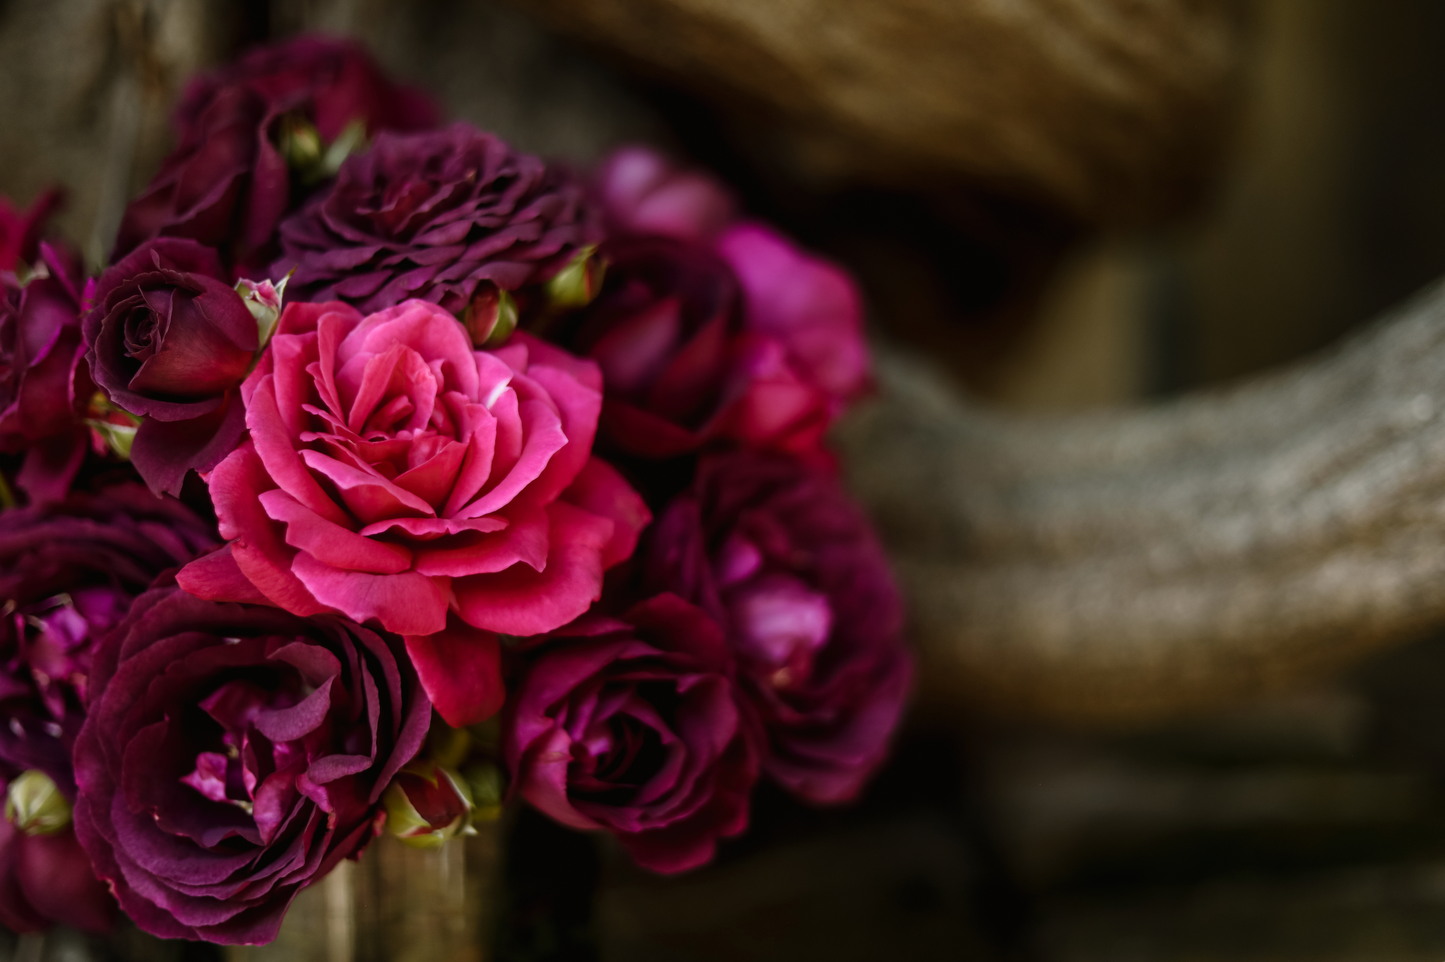 A closeup of a mix of purple and pink garden roses from Rose Story Farm from Santa Barbara. Set in a background of thick vines.